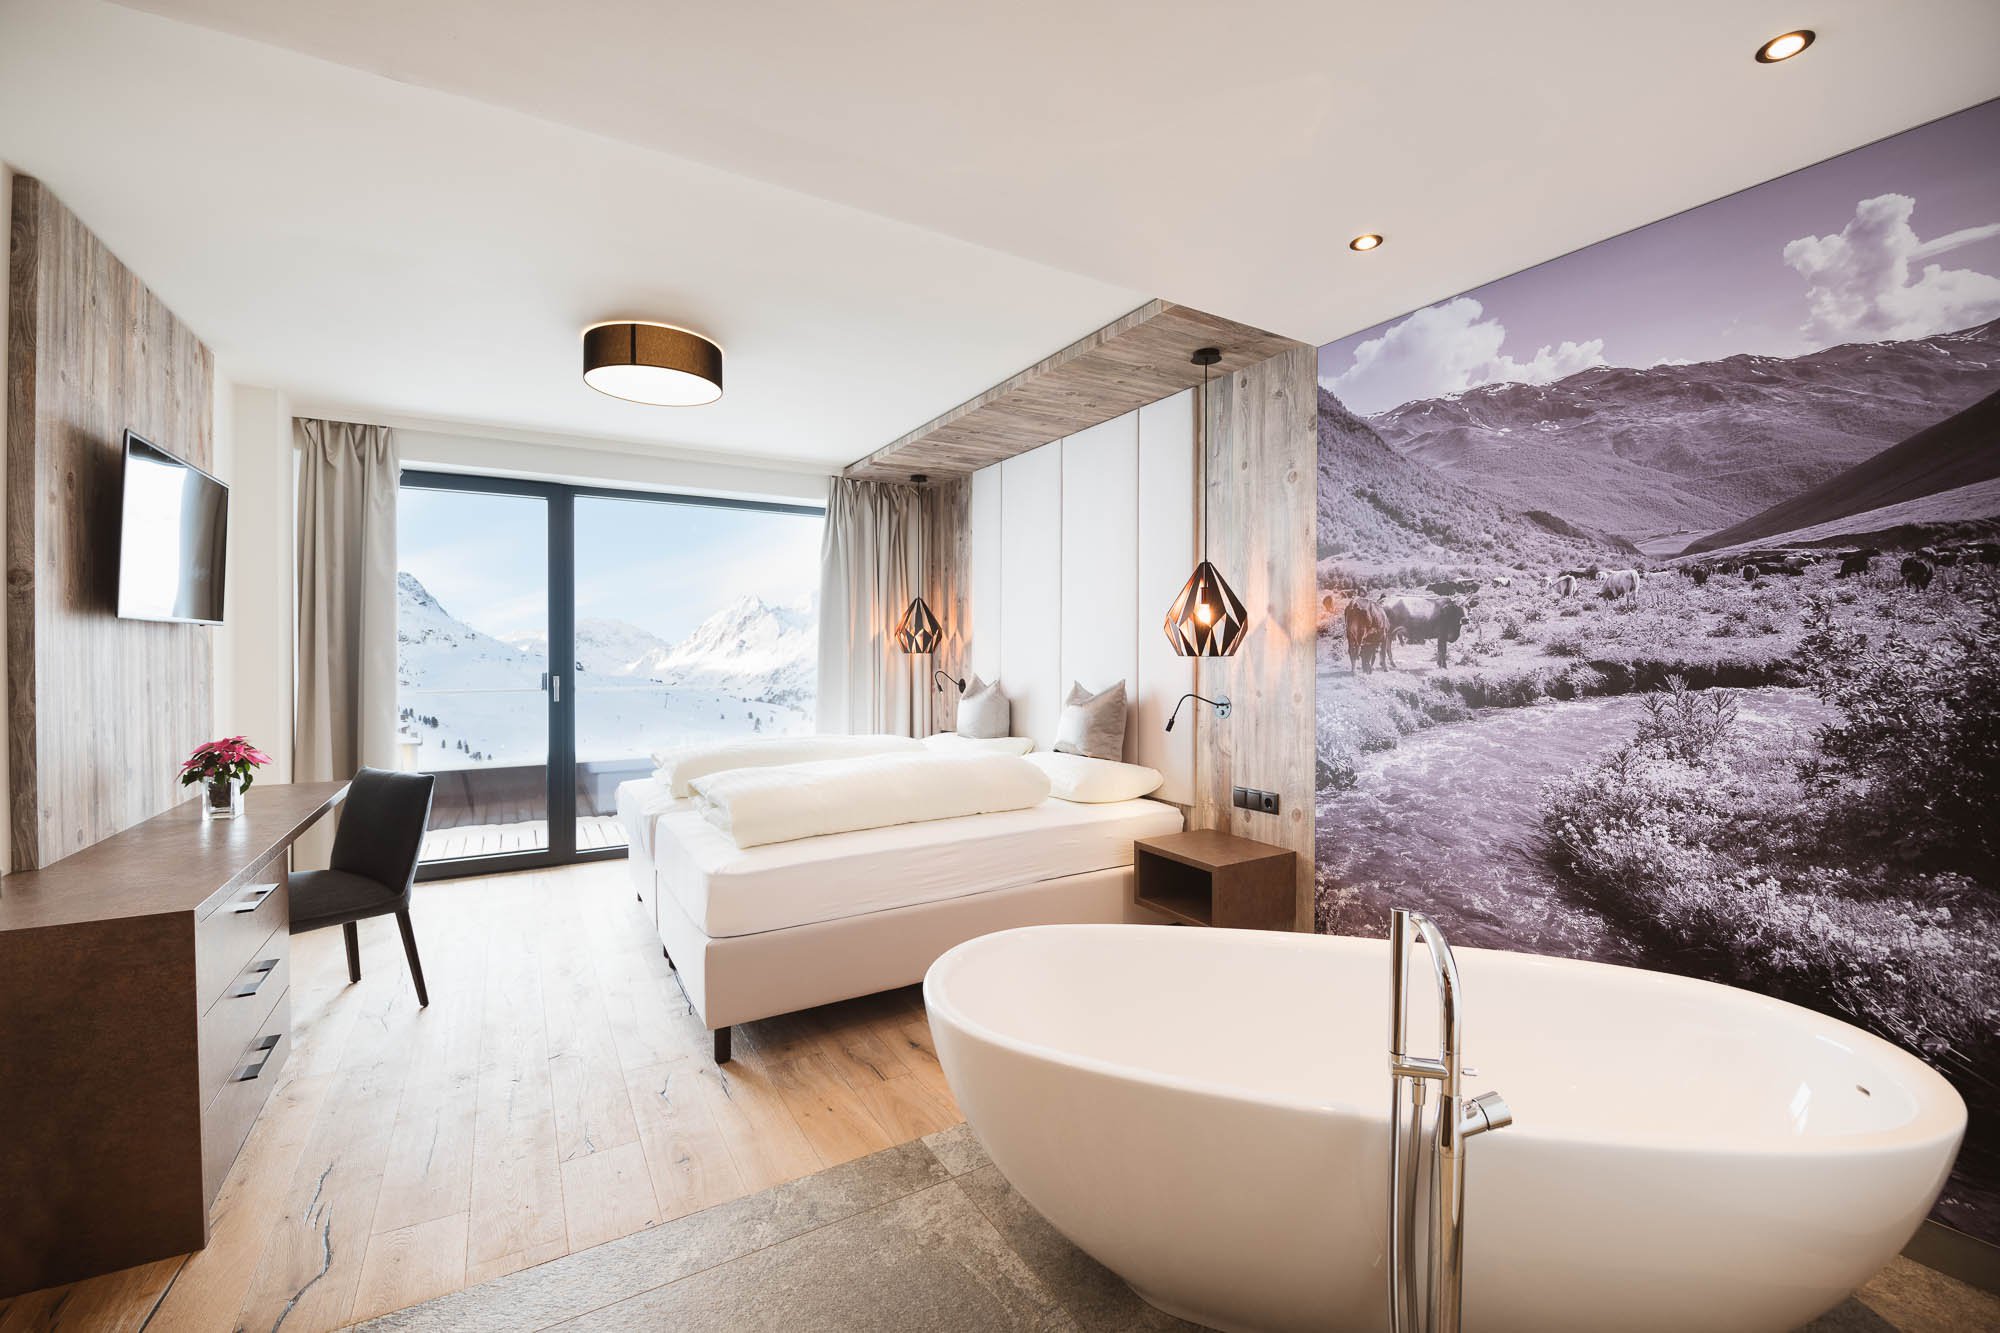 A family room with interconnecting door and a view on the slopes, modern and cosy.